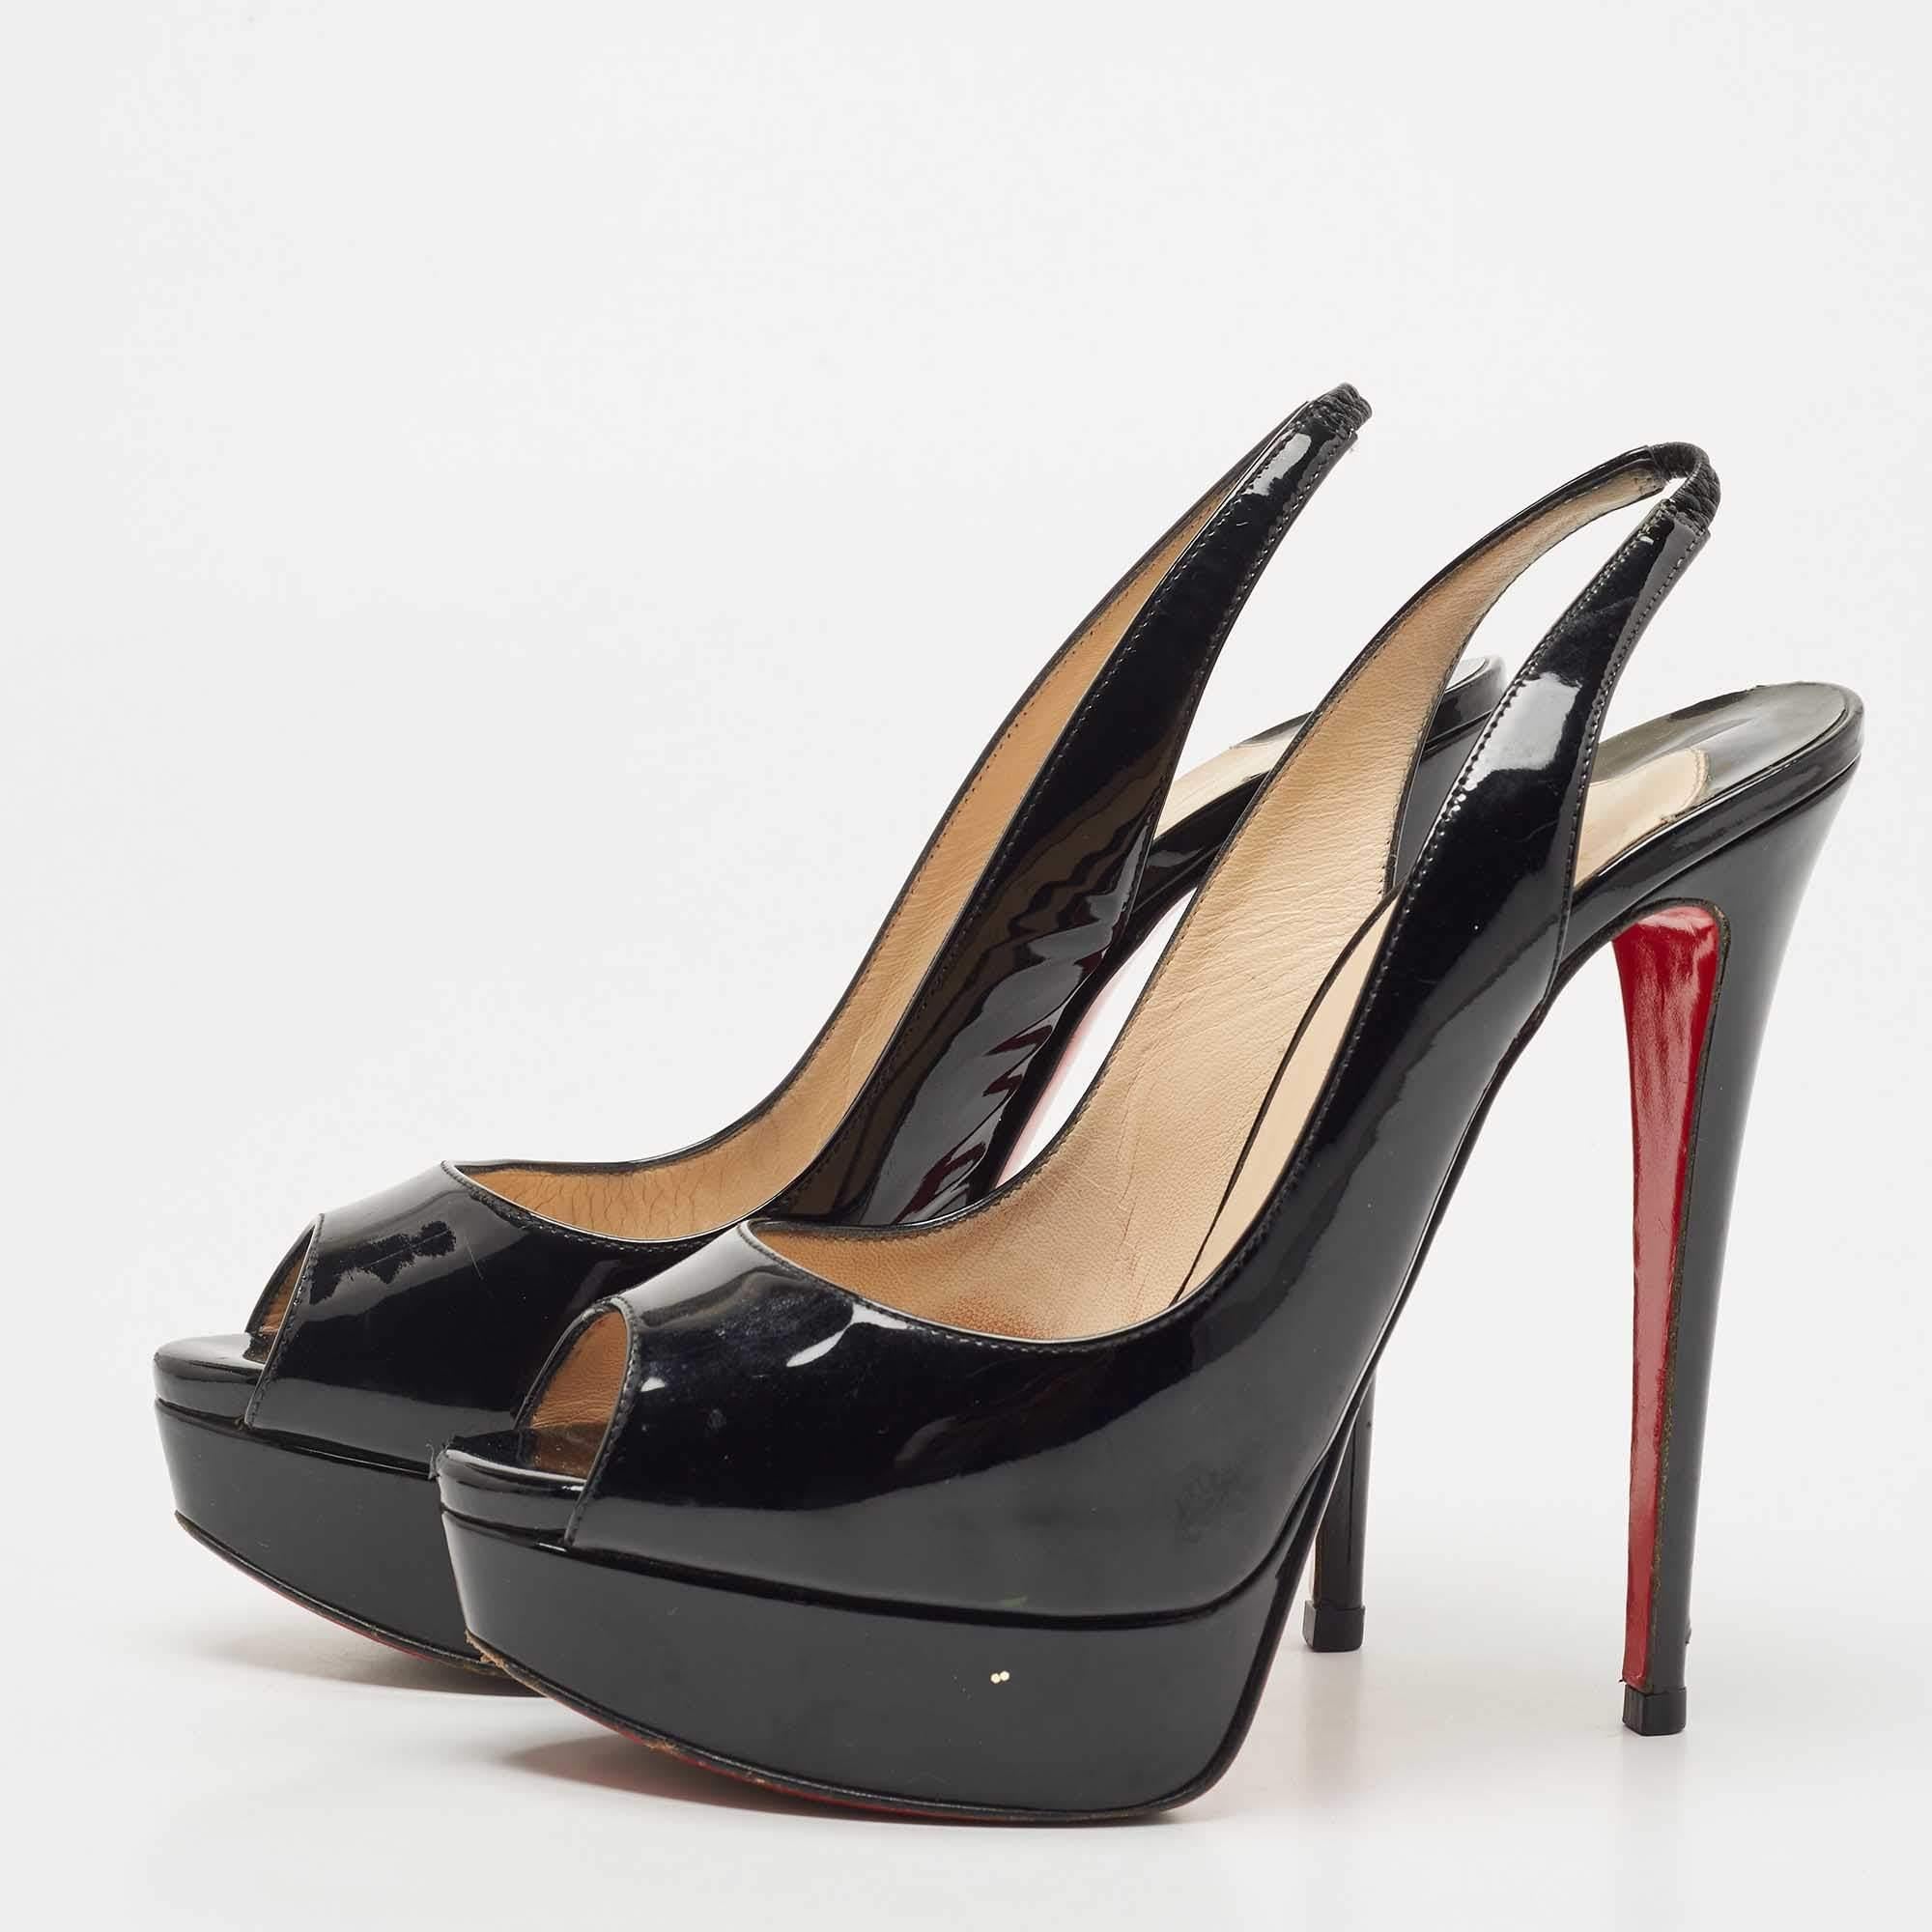 Stand out from the crowd with this classy pair of Louboutins that exude high fashion with class. Crafted from patent leather, this is a creation from their Lady Peep collection. Completed with leather insoles, stiletto heels, and signature